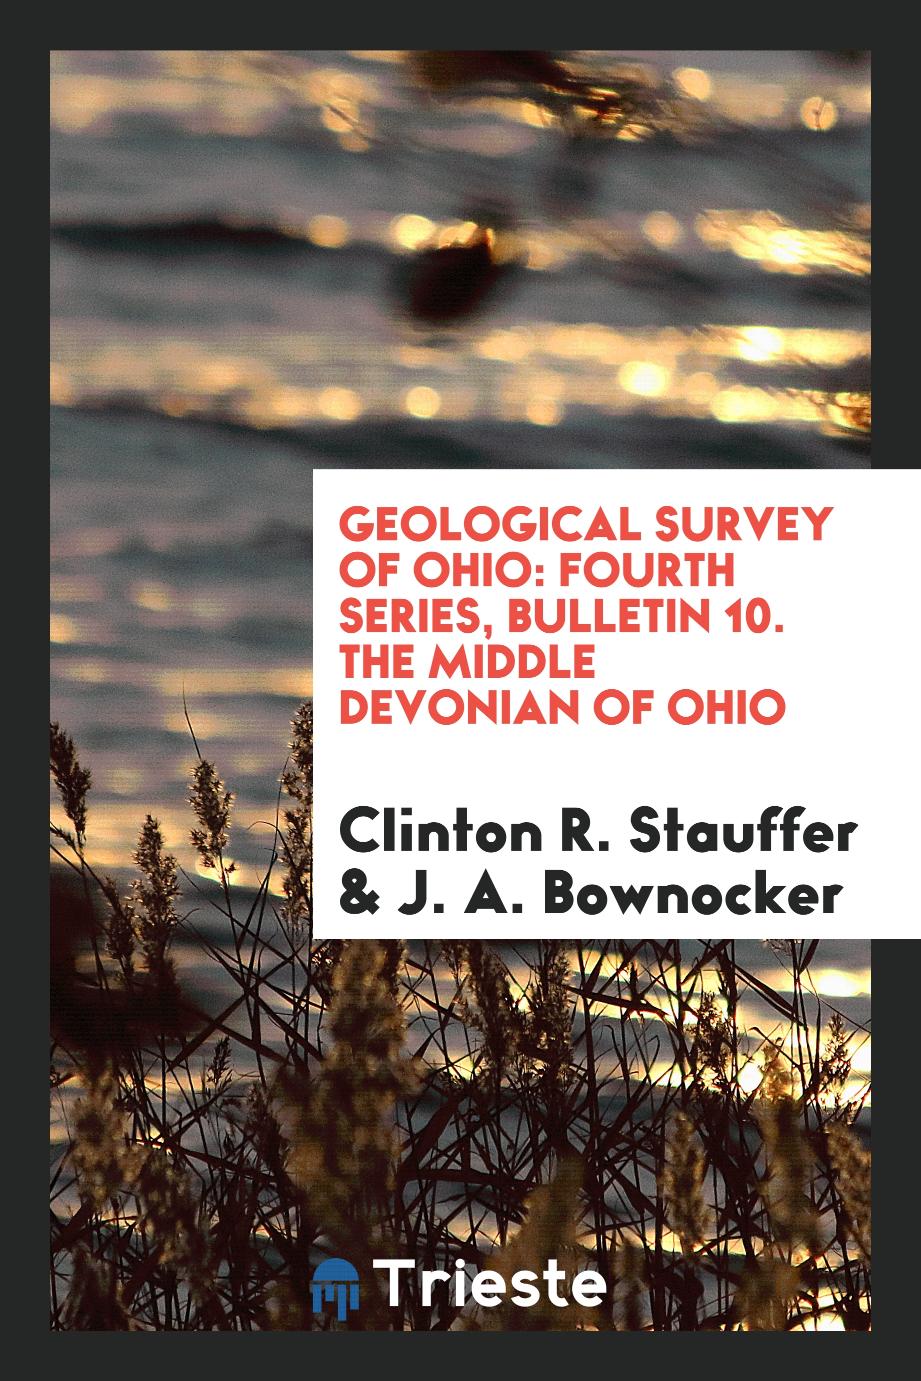 Geological Survey of Ohio: Fourth Series, Bulletin 10. The Middle Devonian of Ohio